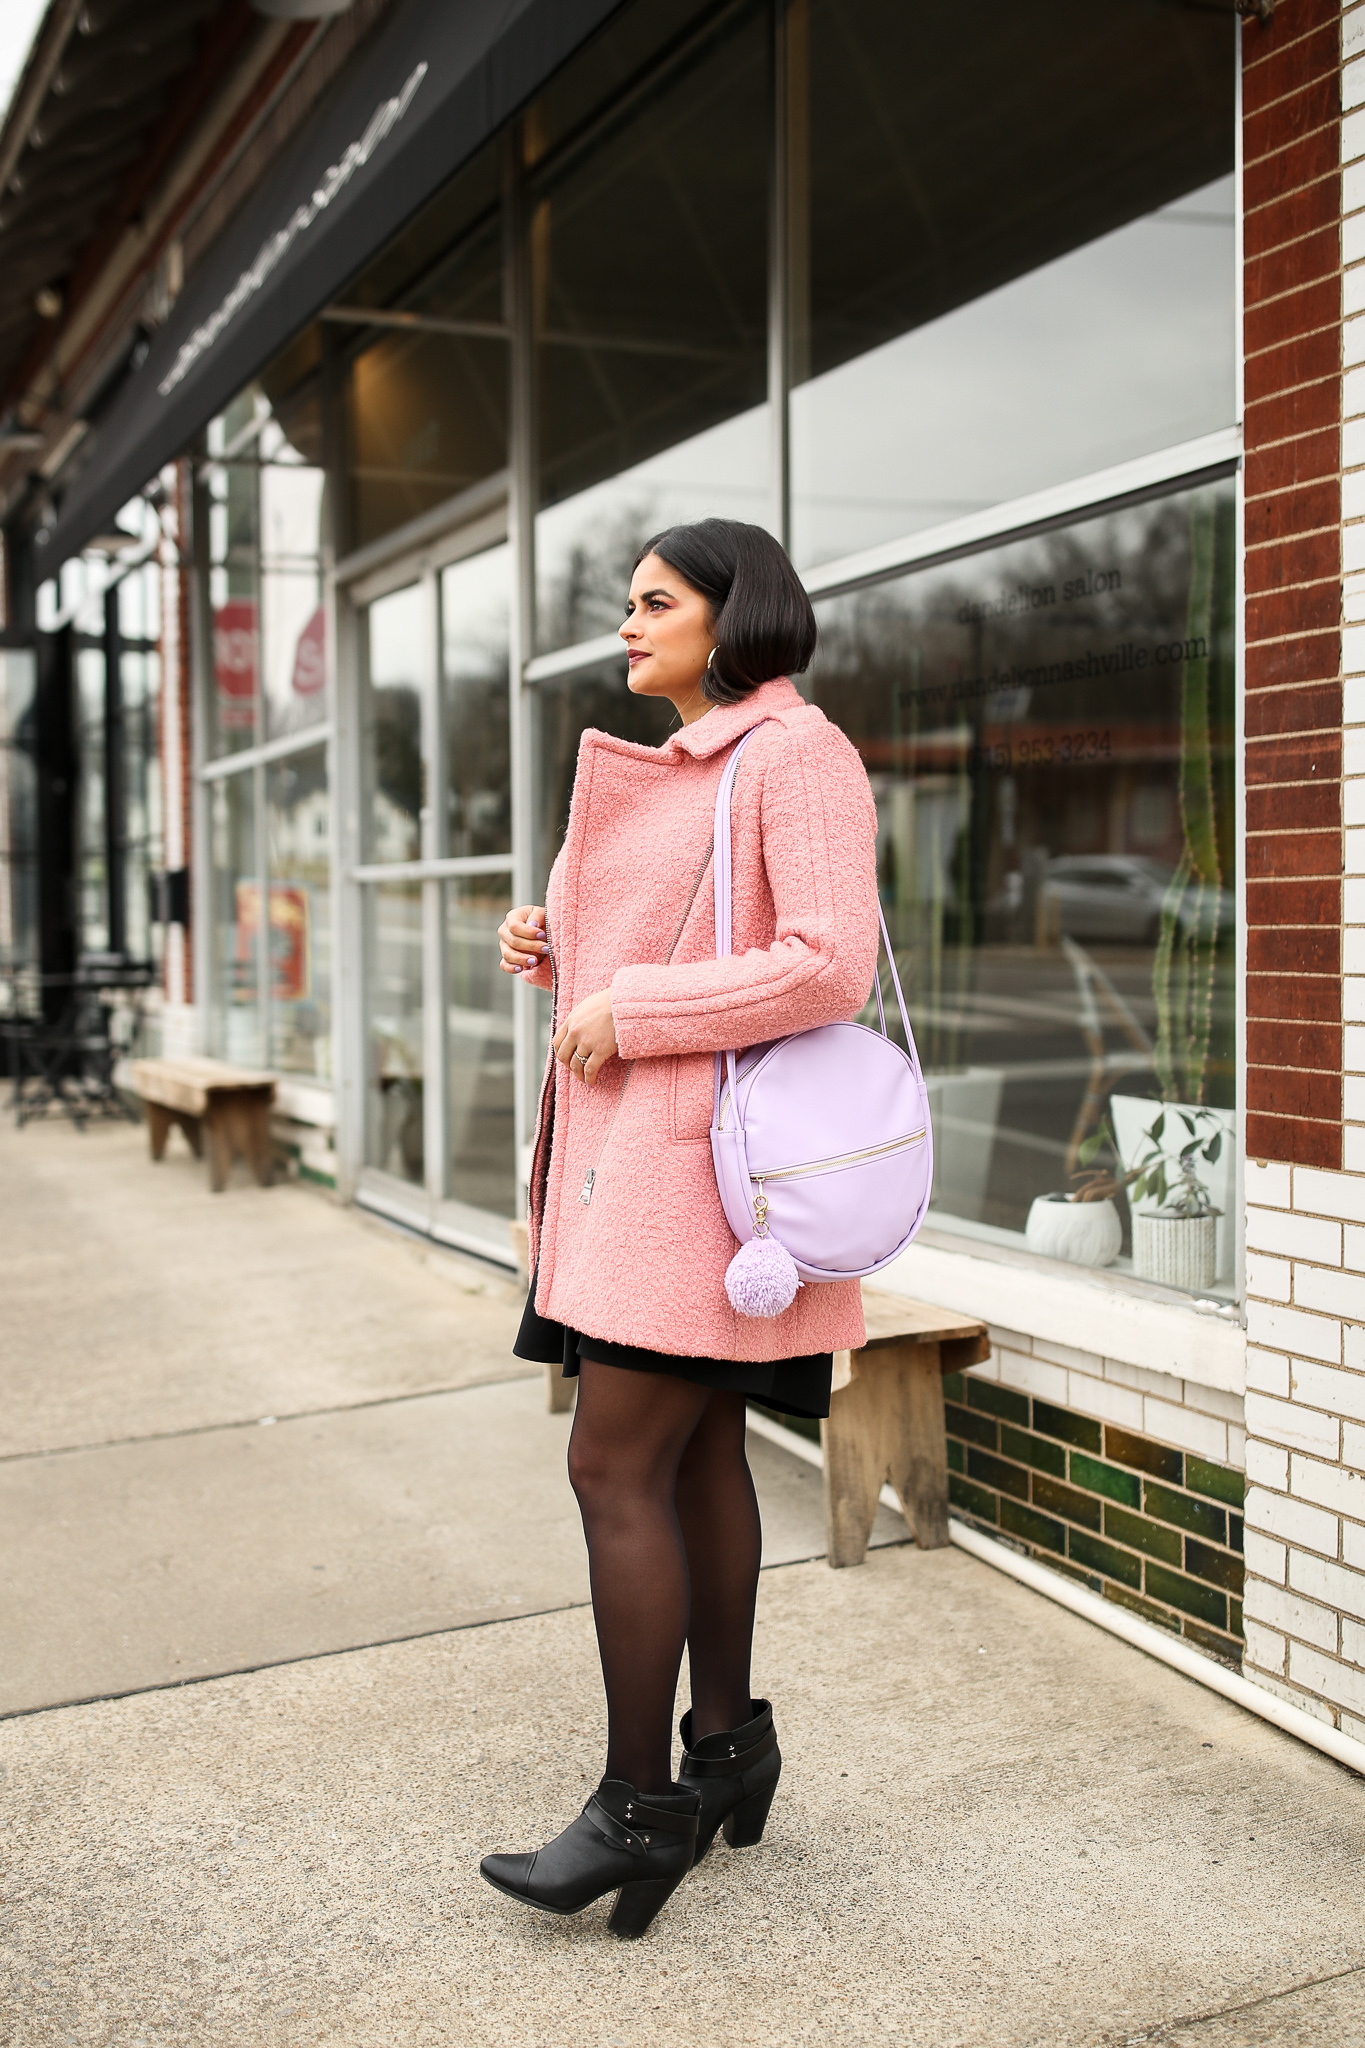 Priya the Blog, Nashville fashion blog, Nashville fashion blogger, Nashville style blog, Nashville style blogger, Rag & Bone Harrow booties, cute Winter outfit, how to style a winter coat, pink fuzzy coat, pink teddy coat, how to wear a pink winter coat, ban.do circle purse, all black Winter outfit